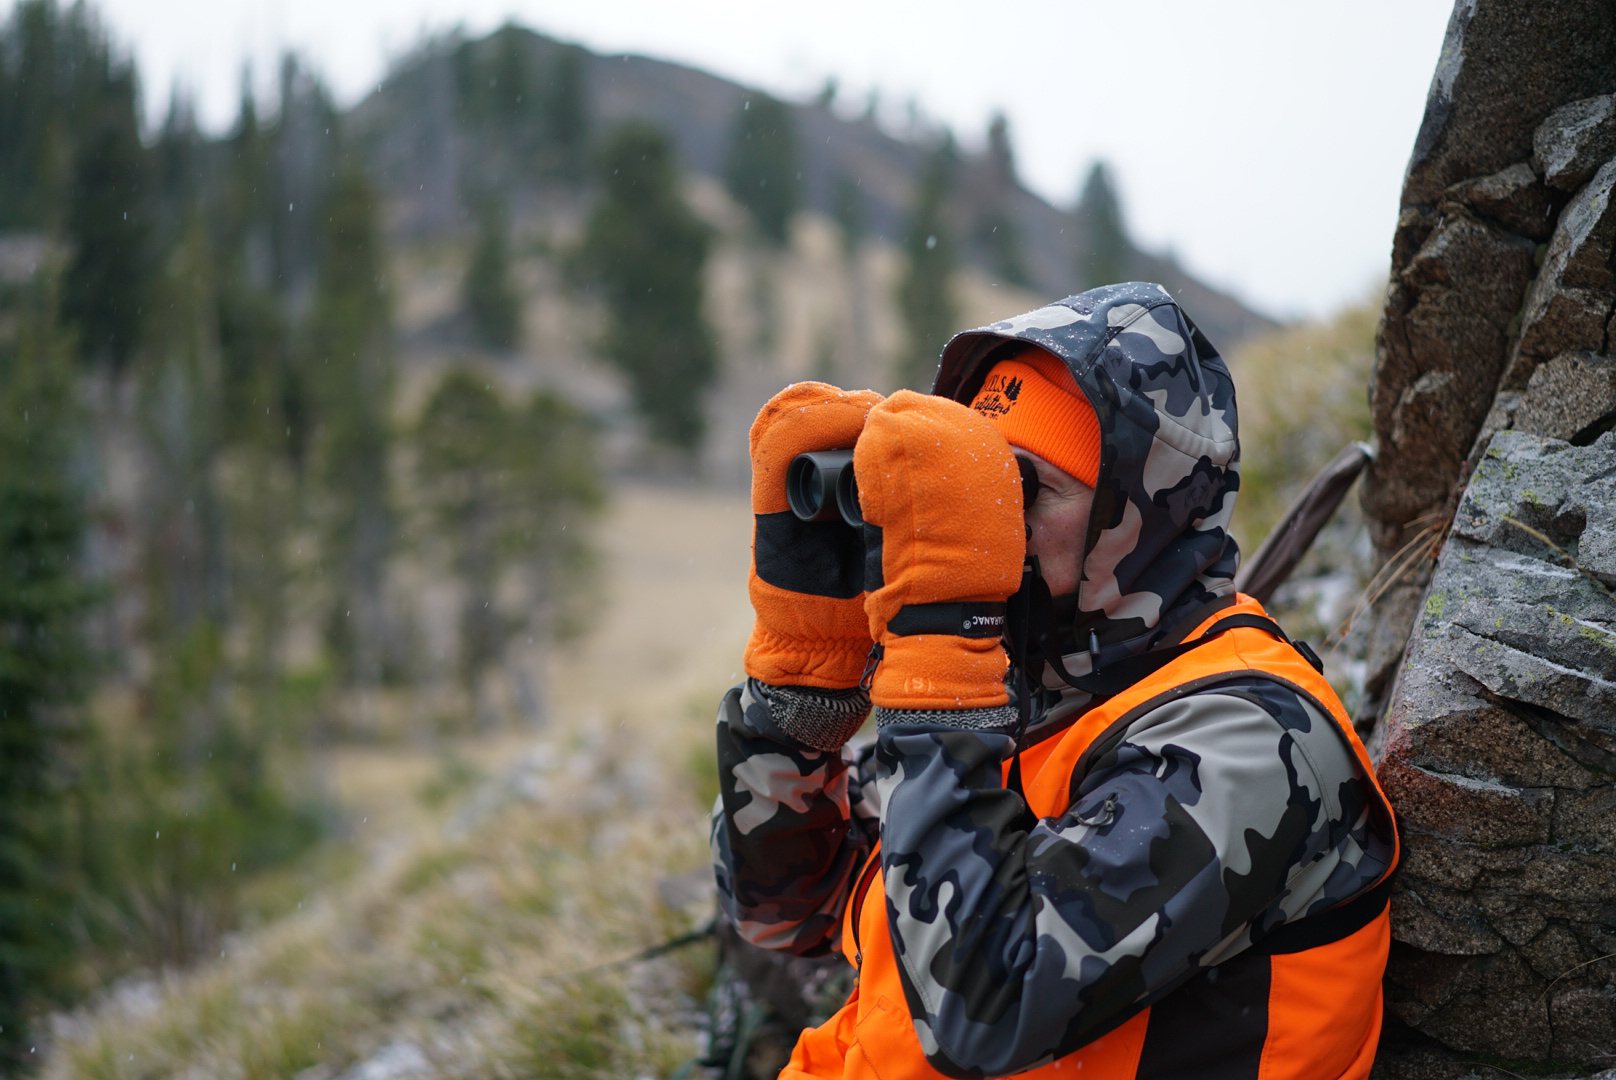 Hunter in camo and orange glassing, trying to fill his over-the-counter elk tag.